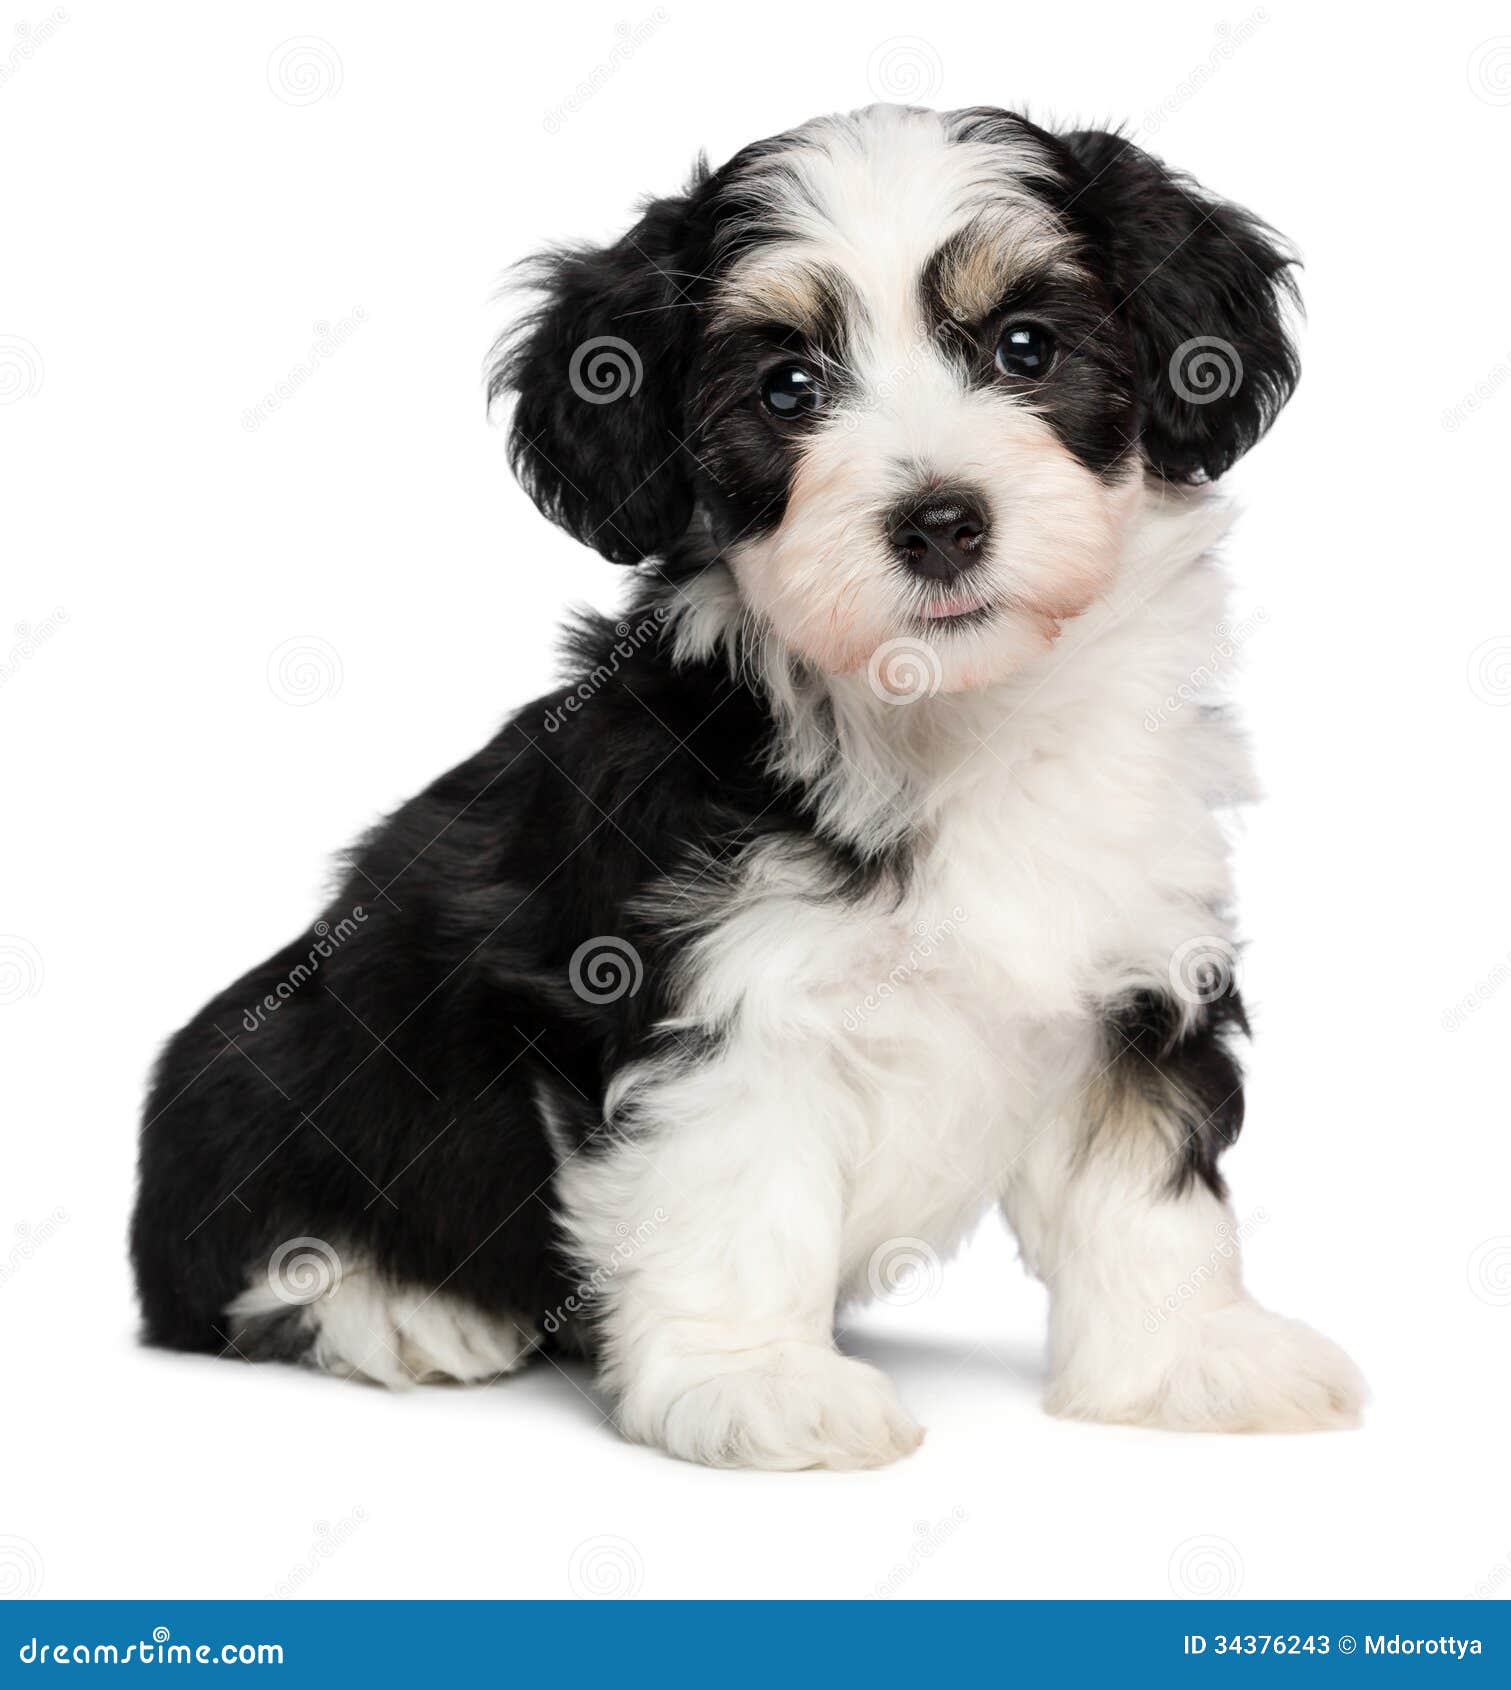 a beautiful sitting tricolor havanese puppy dog